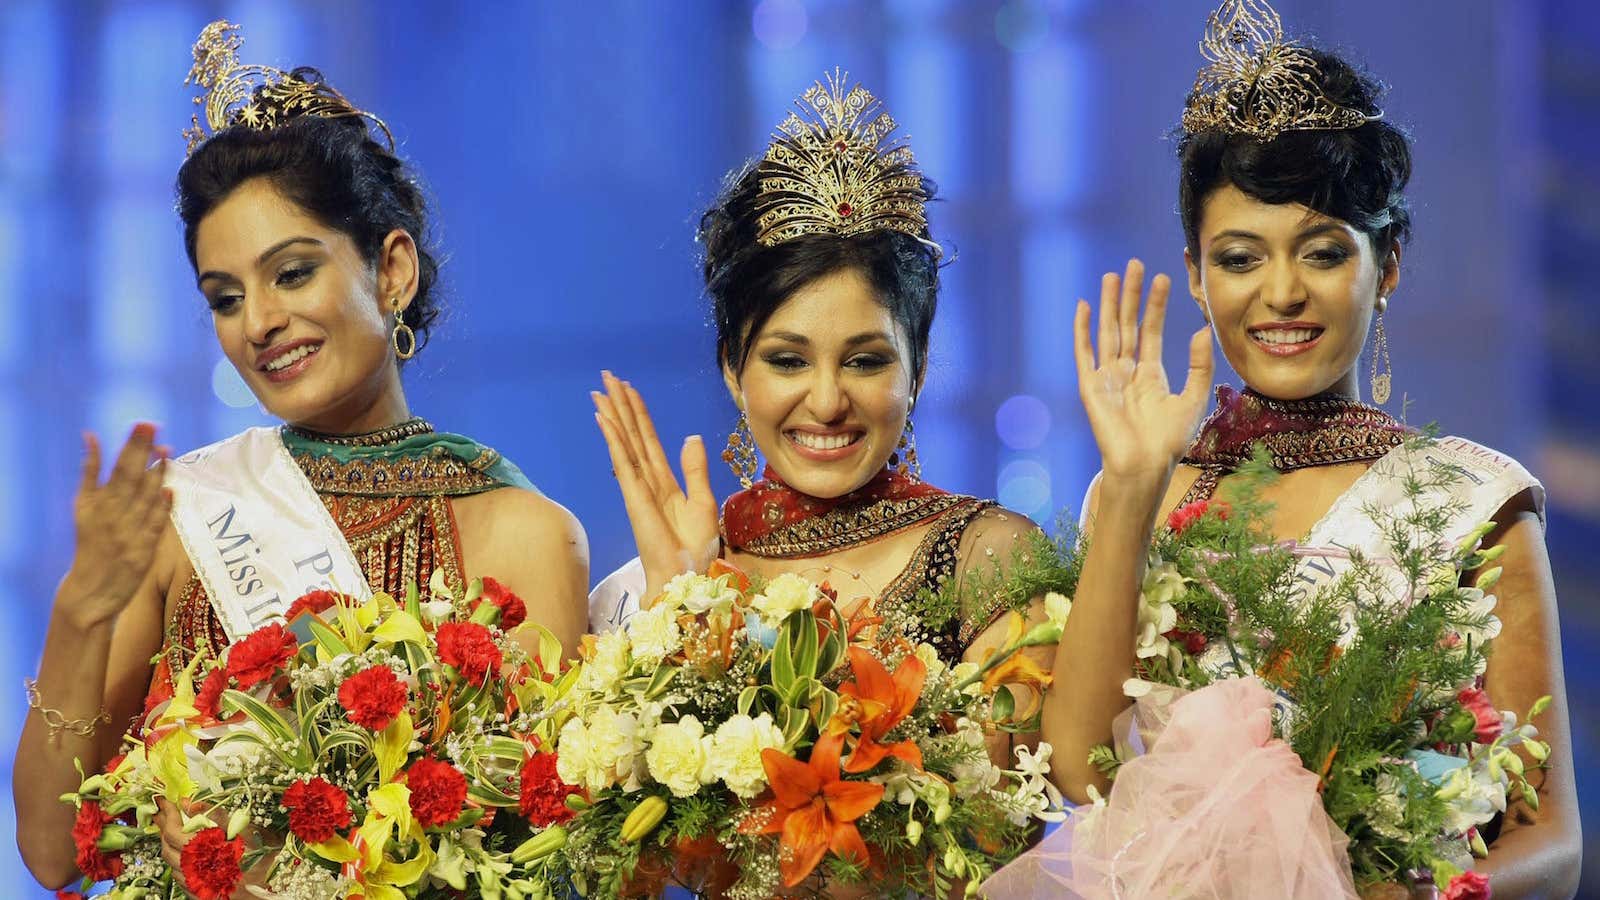 The Femina Miss India Pageant Has Little To Do With Indian Women—or Indian Beauty